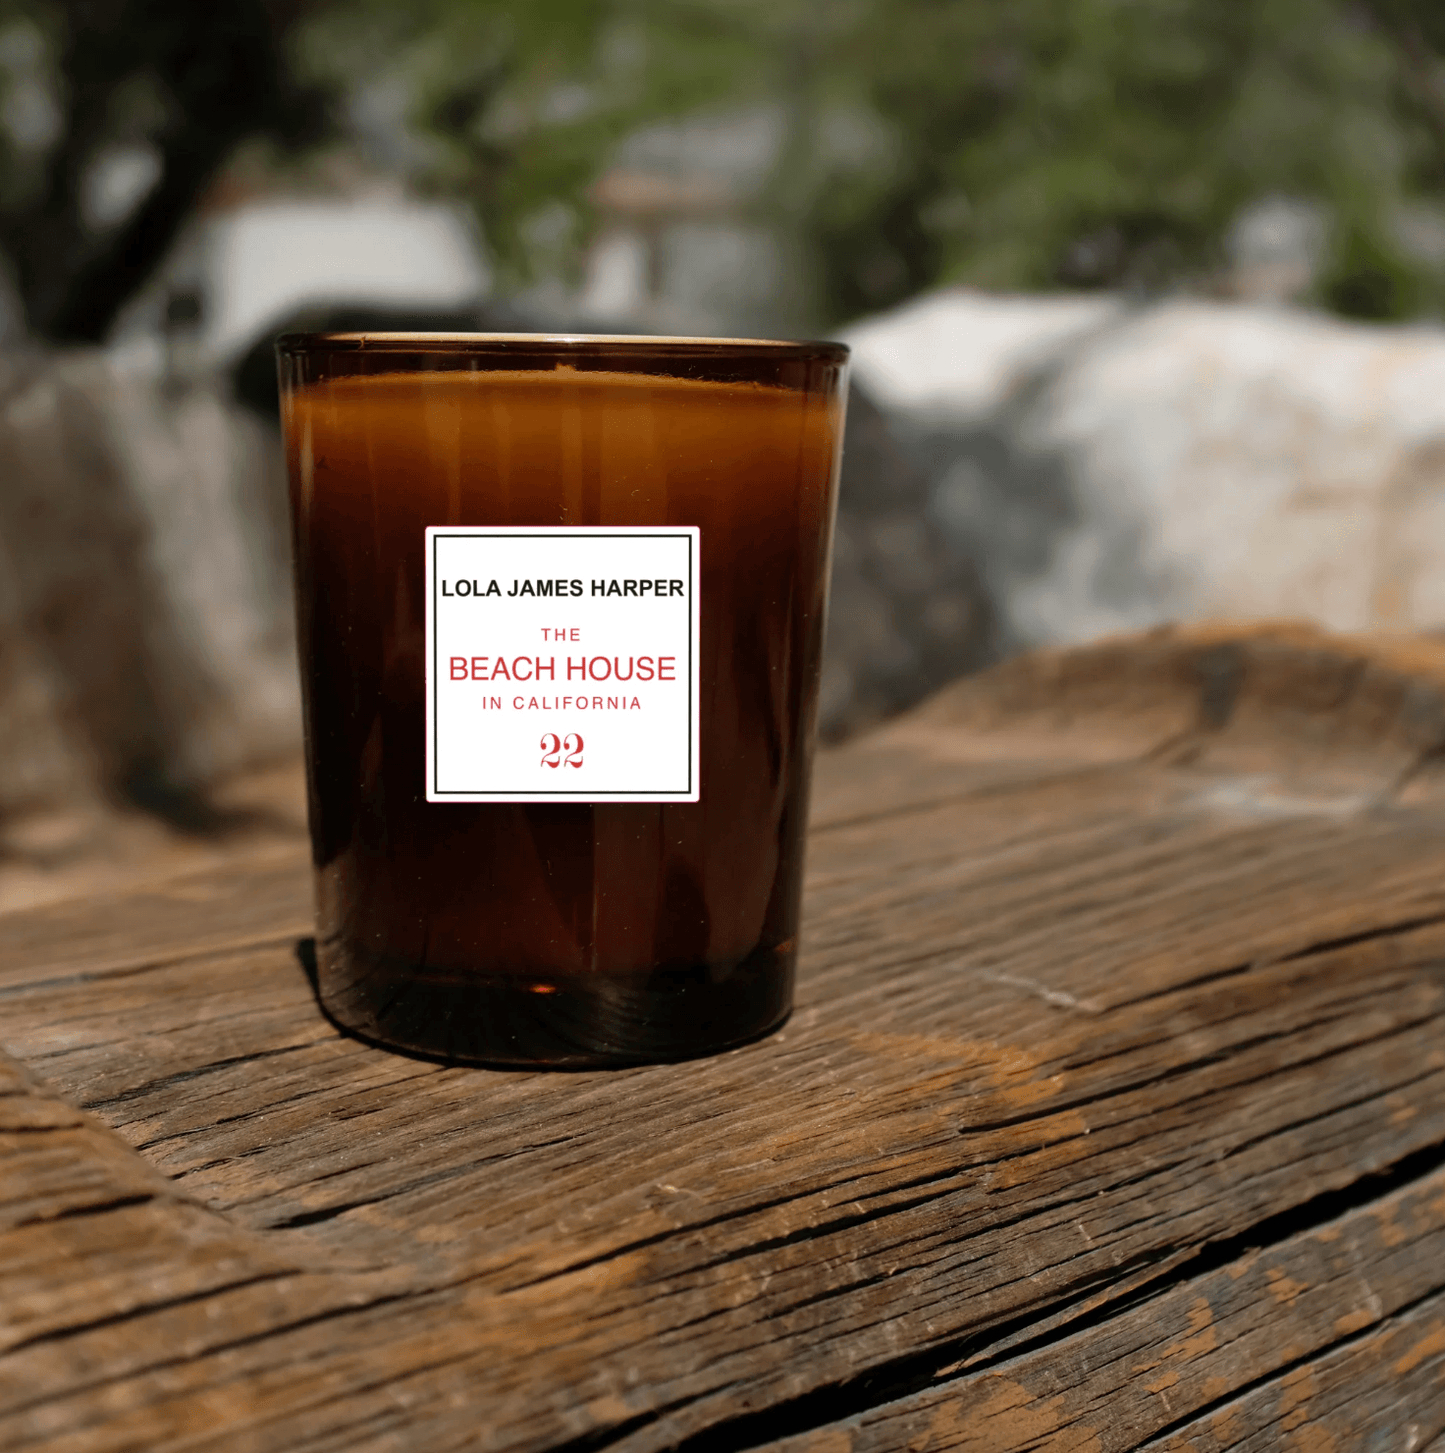 Beach House Candle by Lola James Harper - Haven